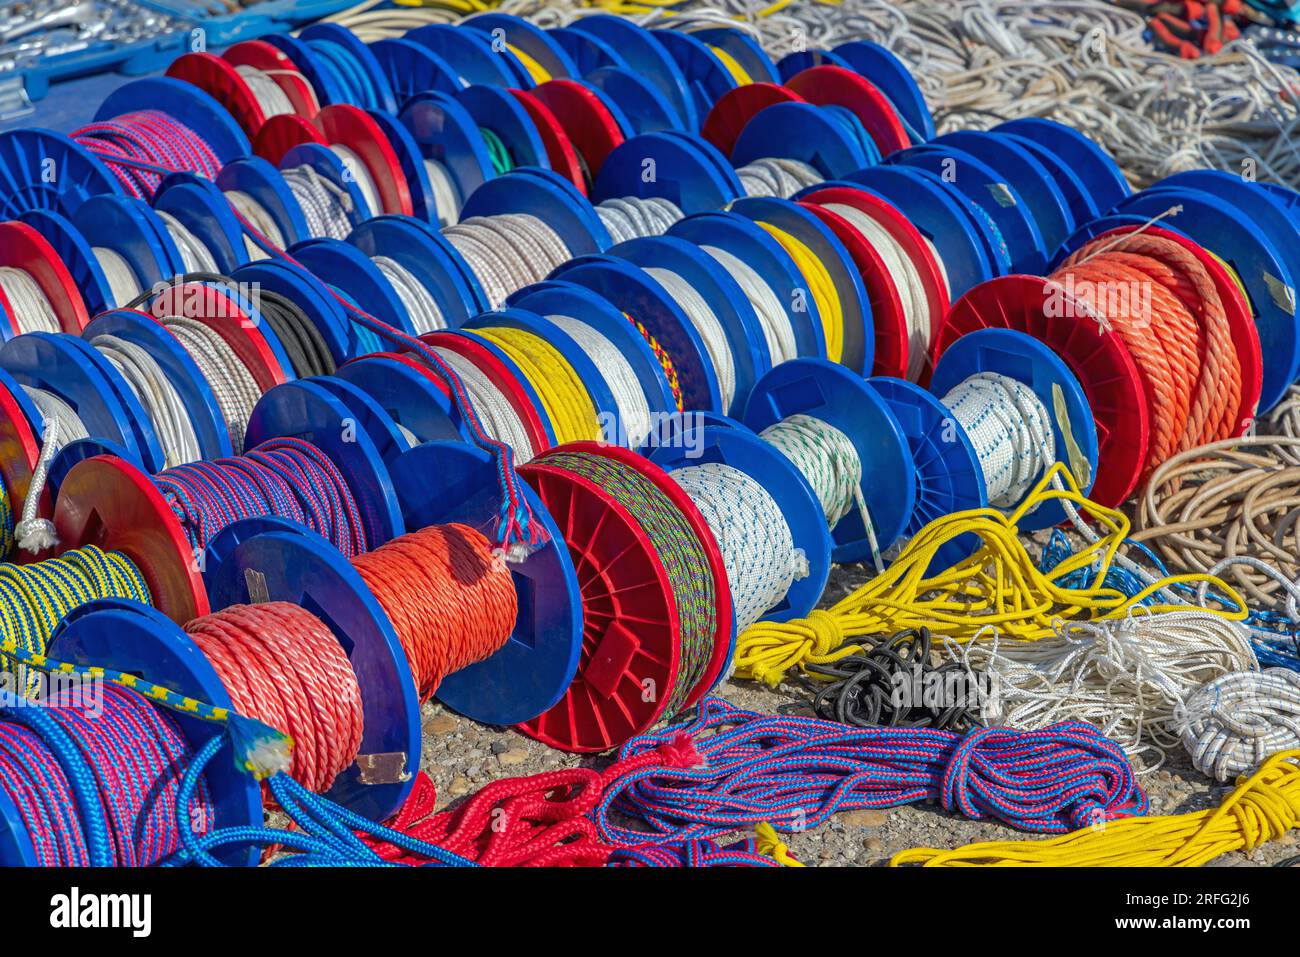 Colourful Nylon Polymer Sunthetic Fibres Ropes at Reels Coils Variety Stock Photo